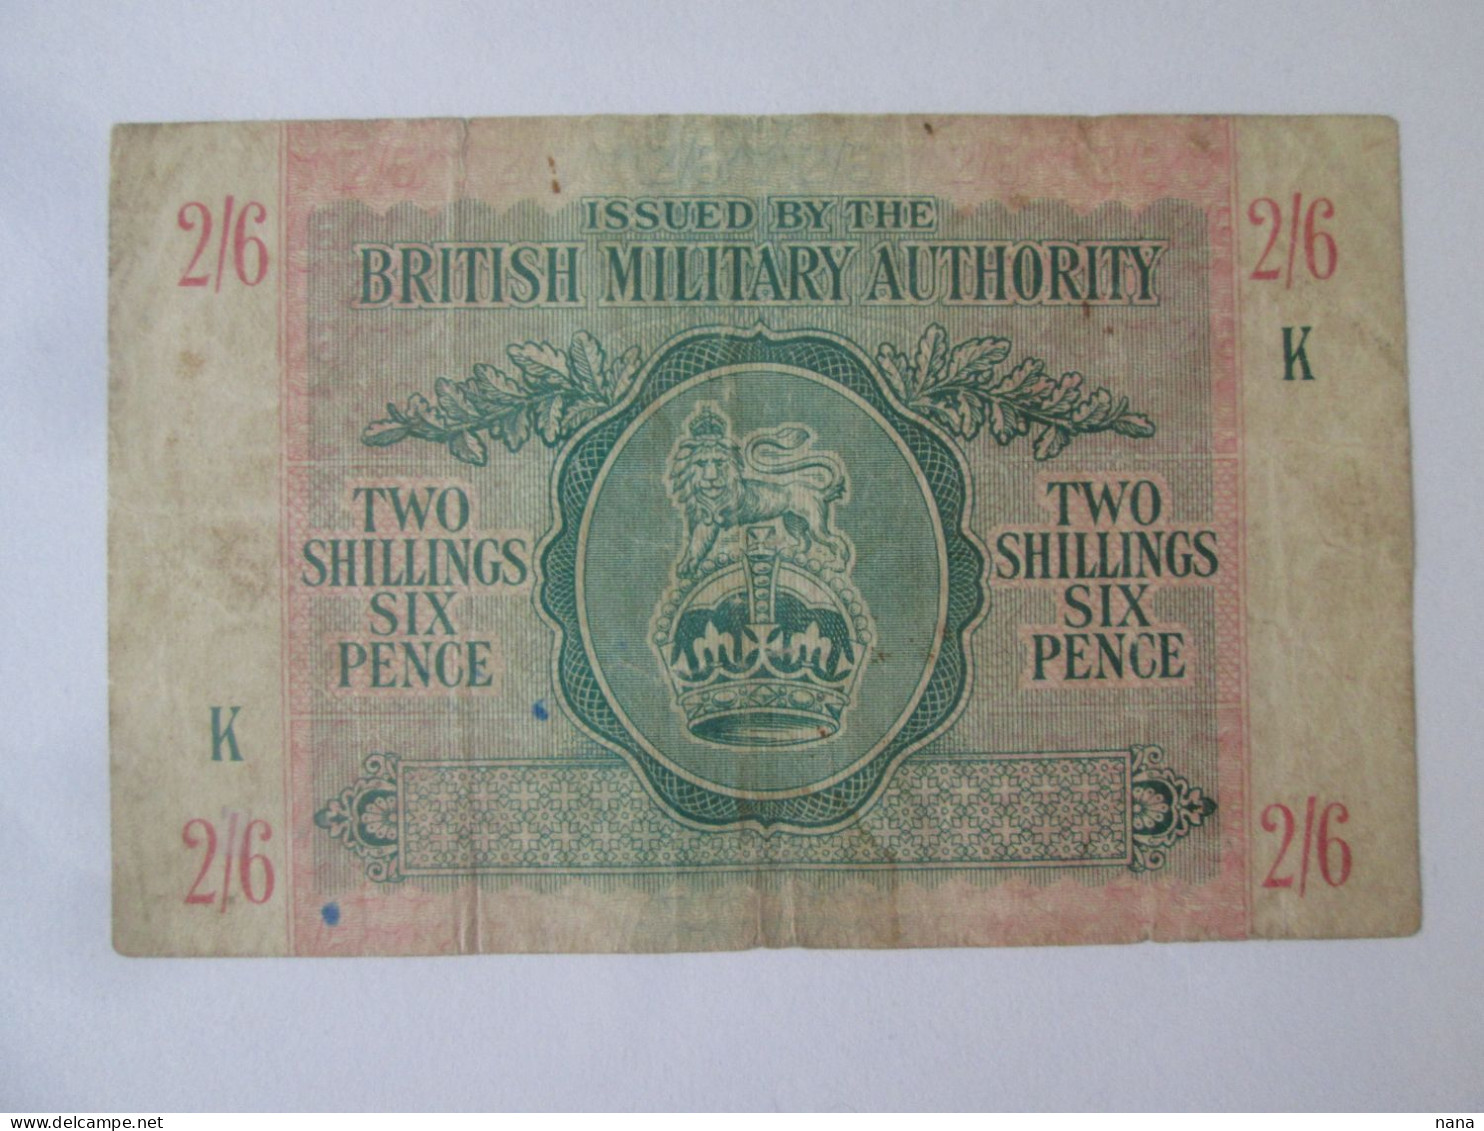 British Military Authority 2 Shillings  6 Pence 1943 Banknote See Pictures - British Armed Forces & Special Vouchers